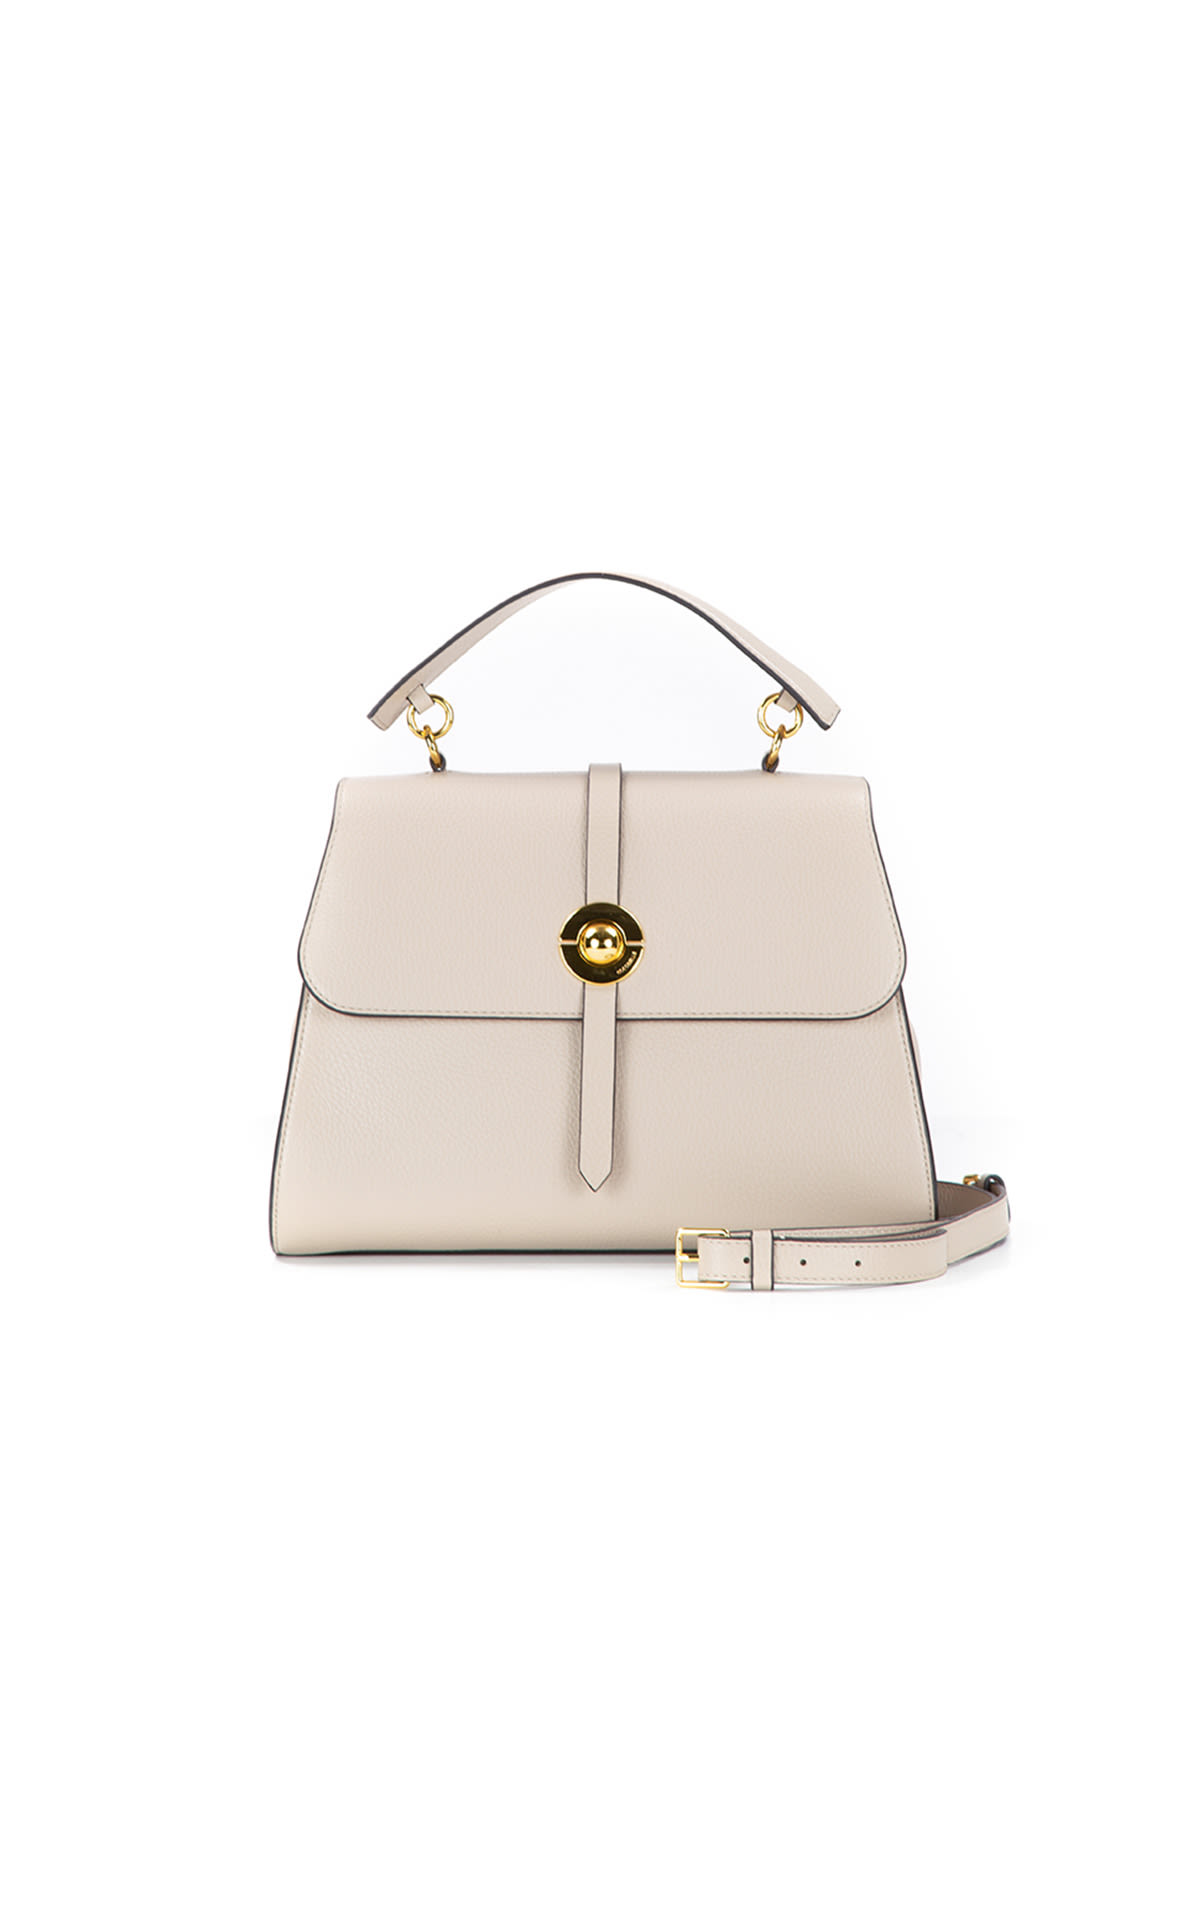 Coccinelle Shoulder bag in white leather